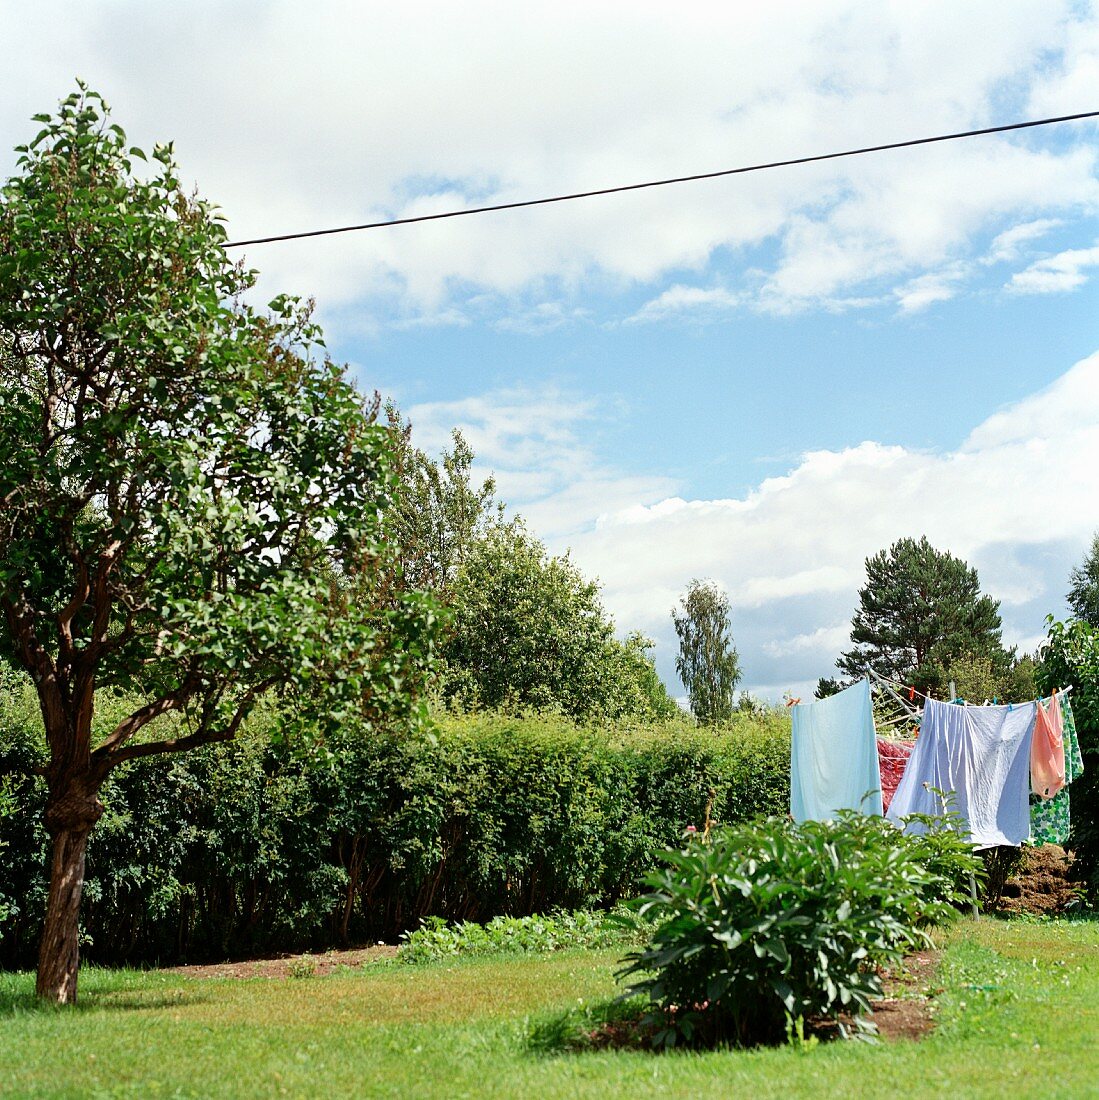 Washing on rotary clothes dryer in garden